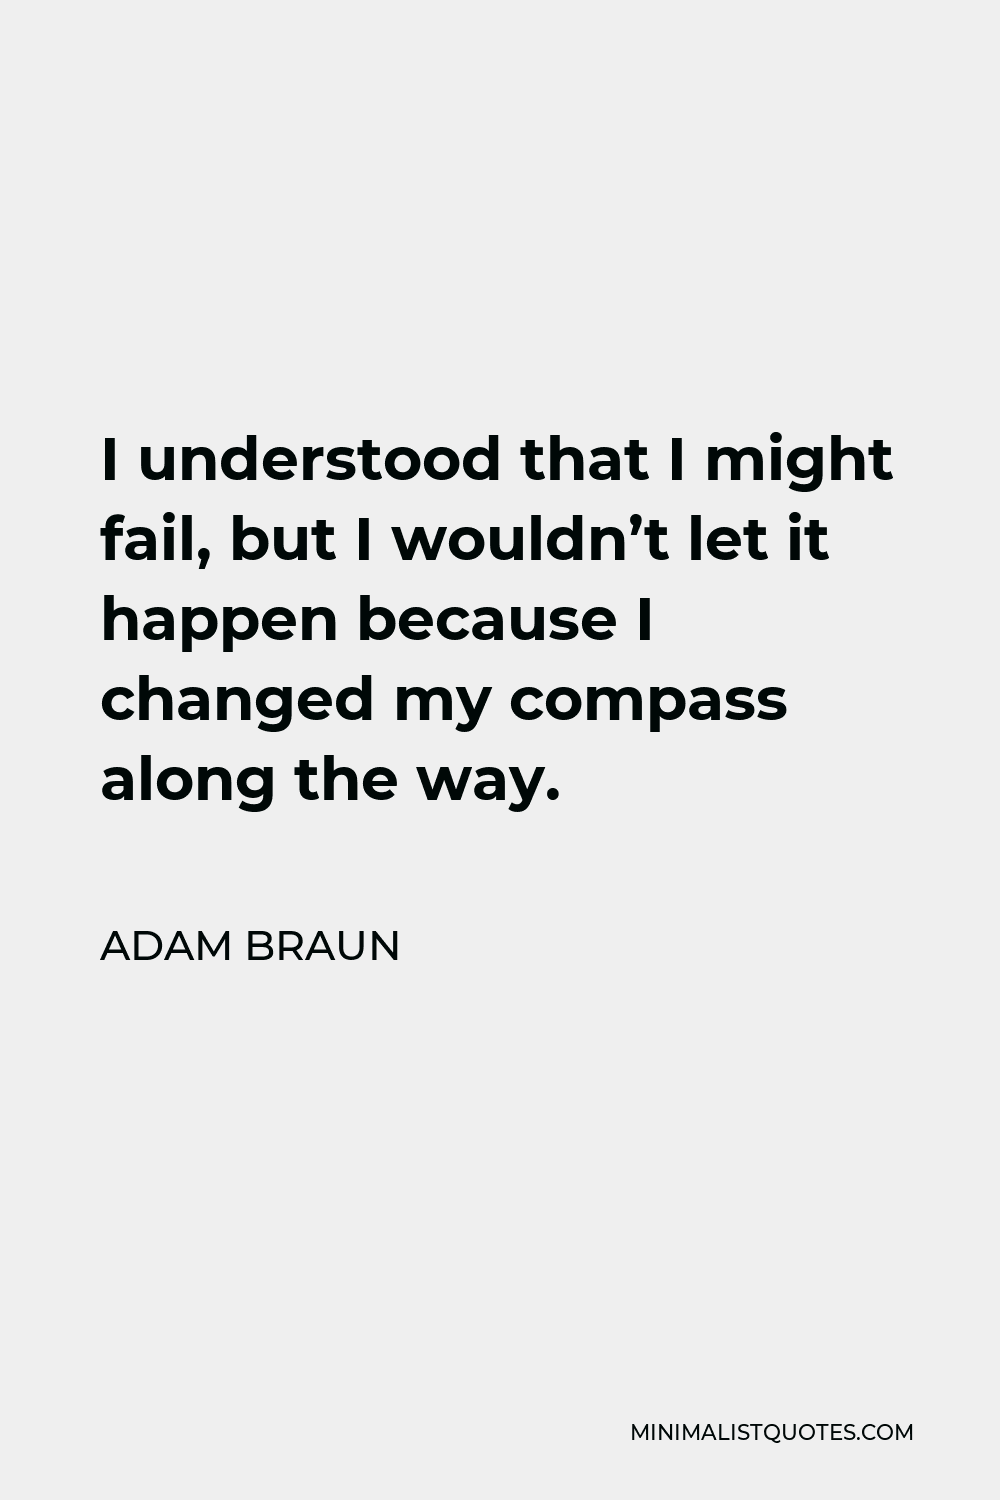 Adam Braun Quote - I understood that I might fail, but I wouldn’t let it happen because I changed my compass along the way.